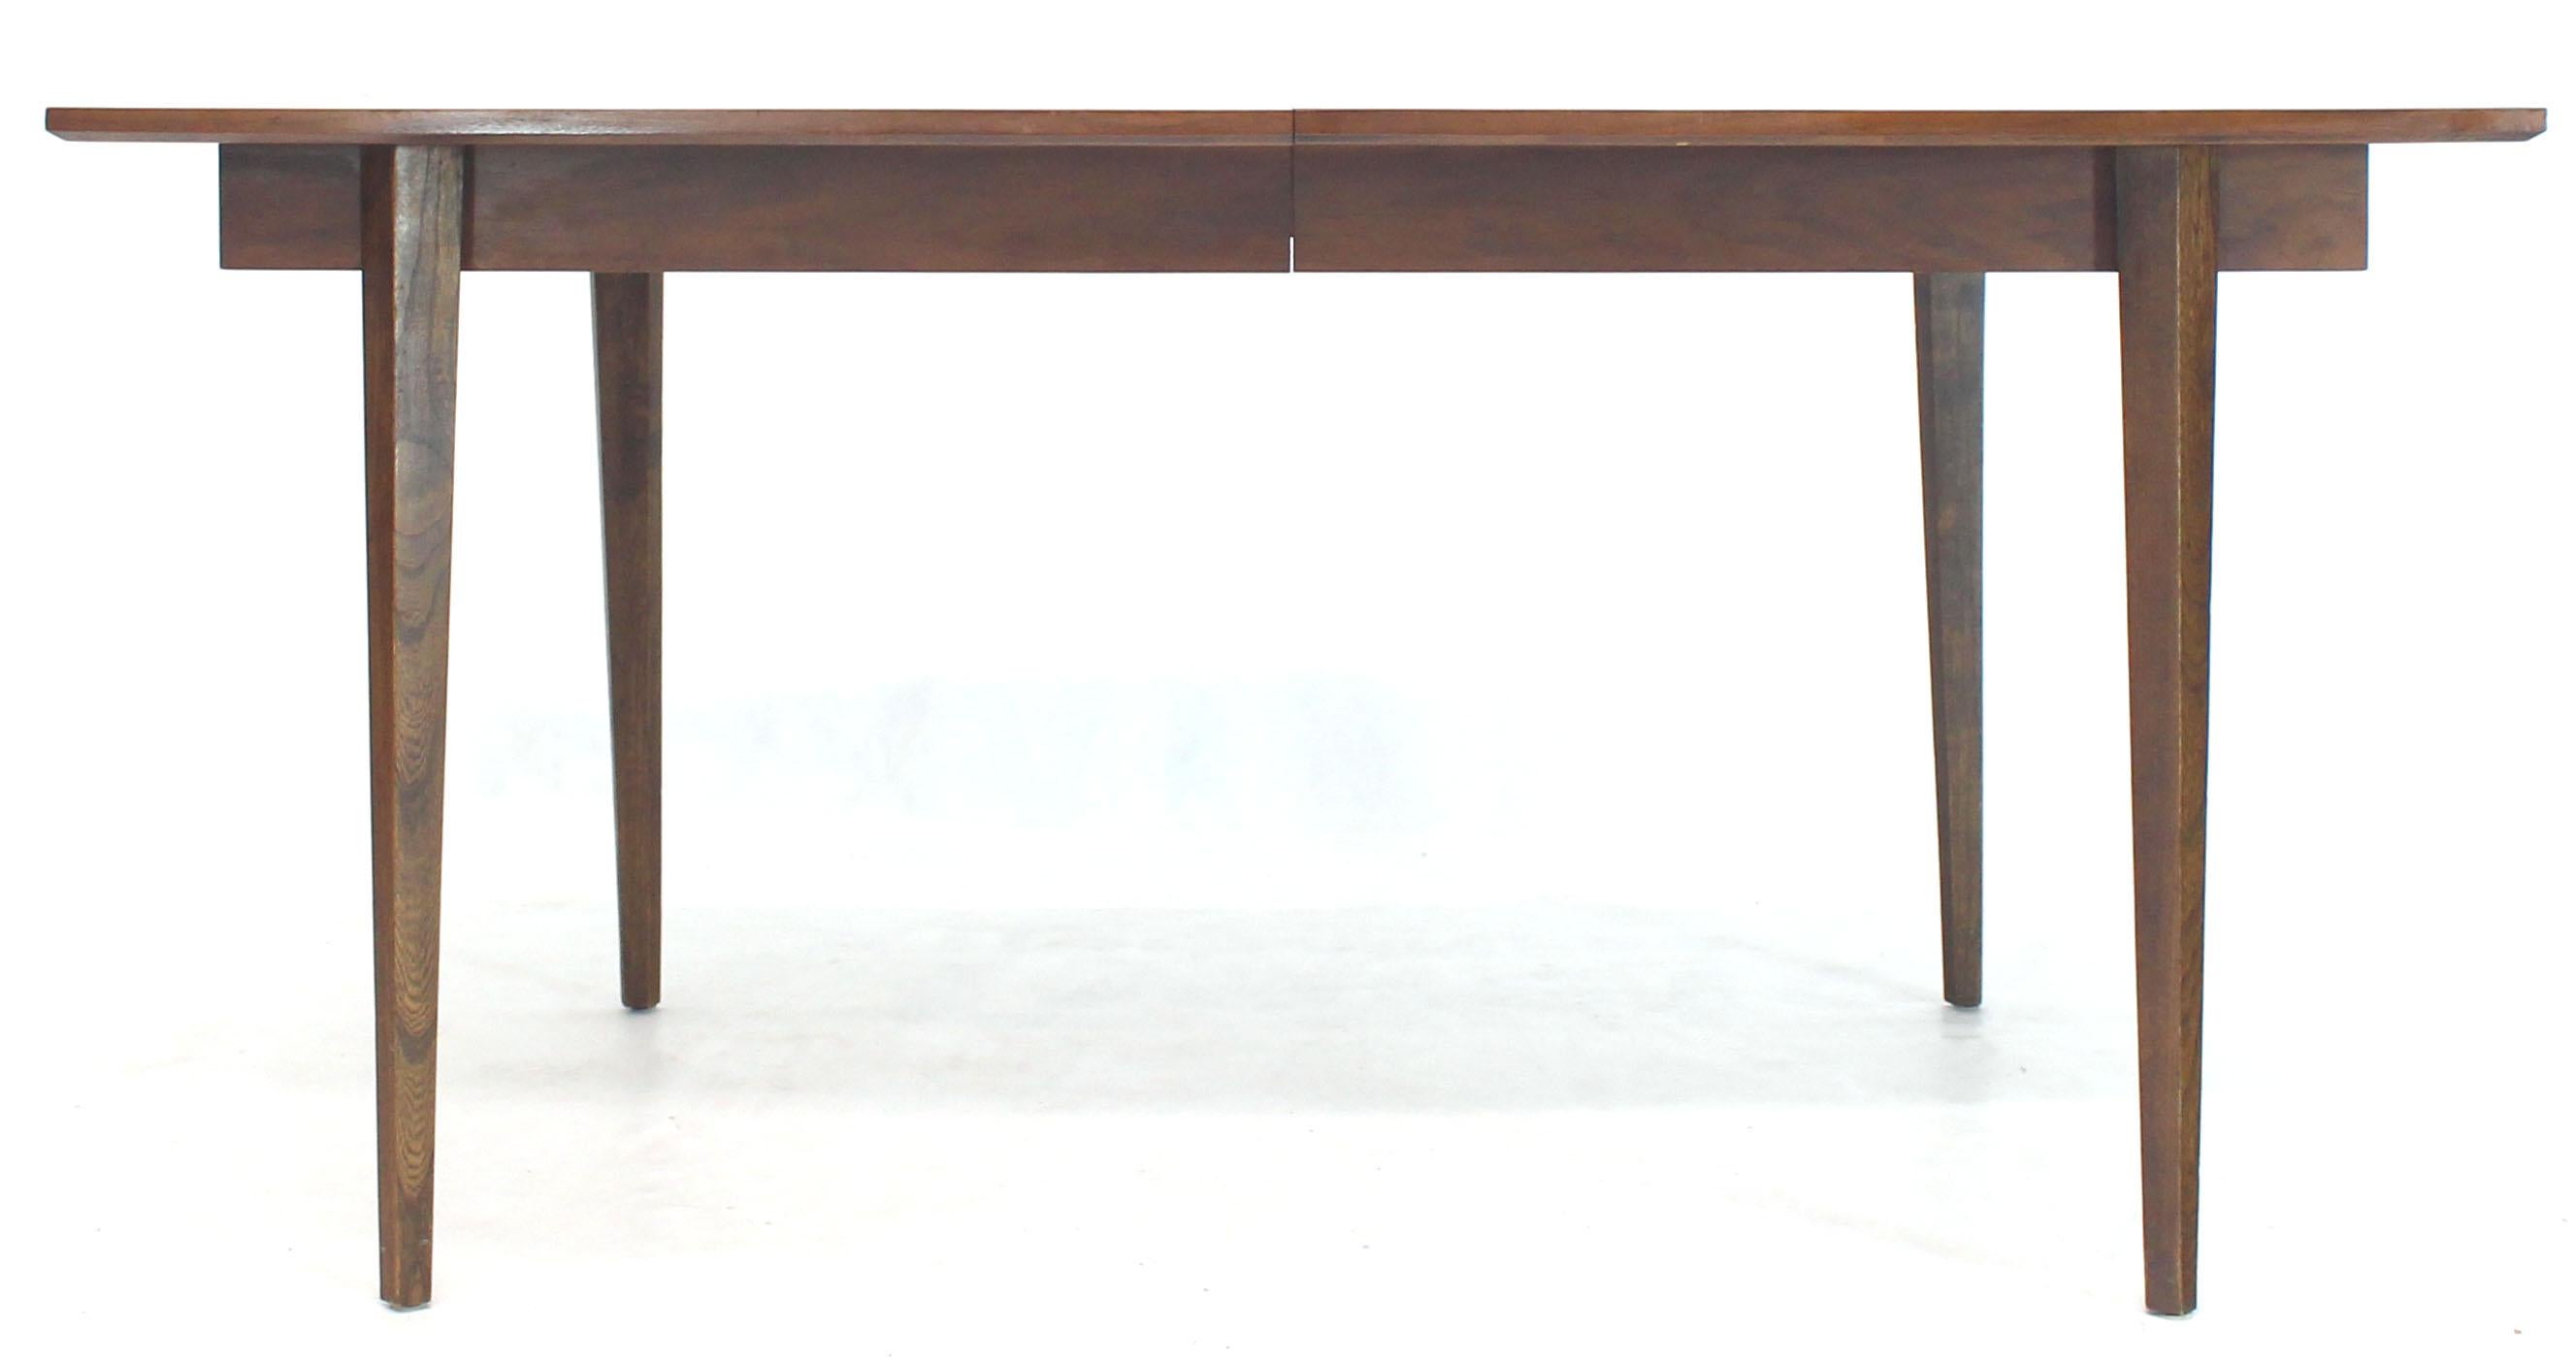 20th Century Danish Mid-Century Modern Walnut Wide Rectangle Dining Table 2 Extension Boards For Sale